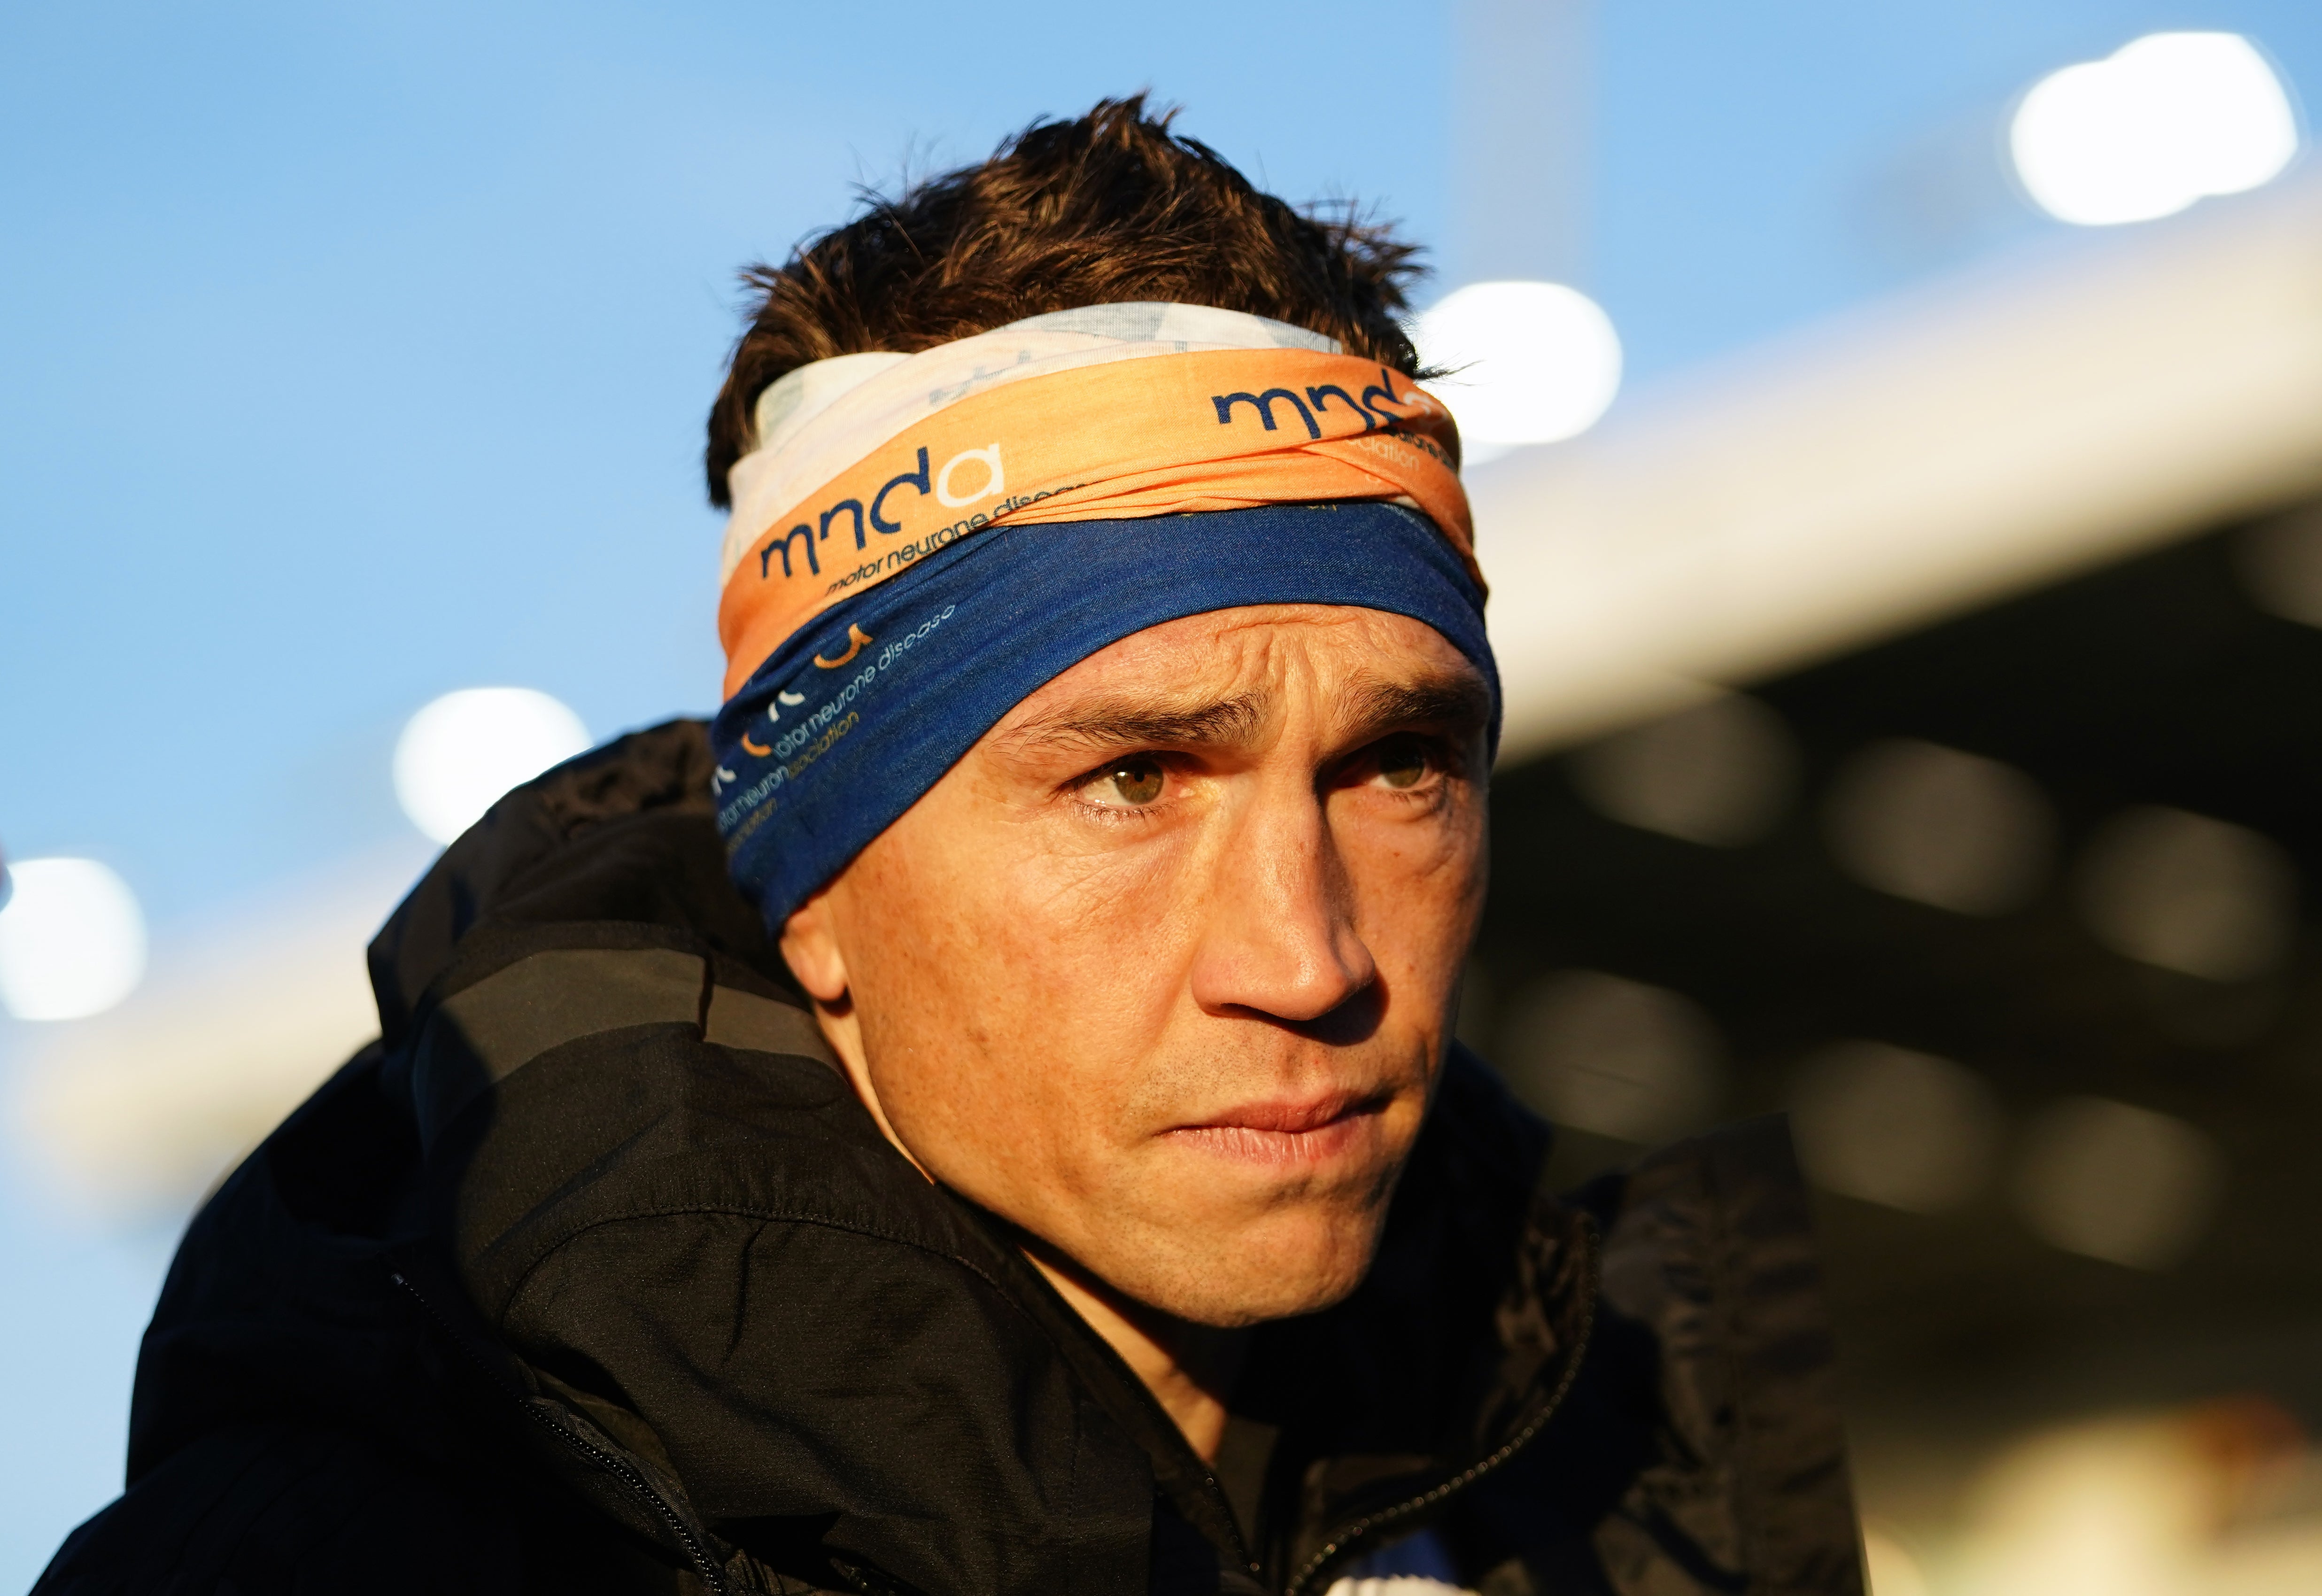 Rugby League legend Kevin Sinfield is raising funds for motor neurone disease